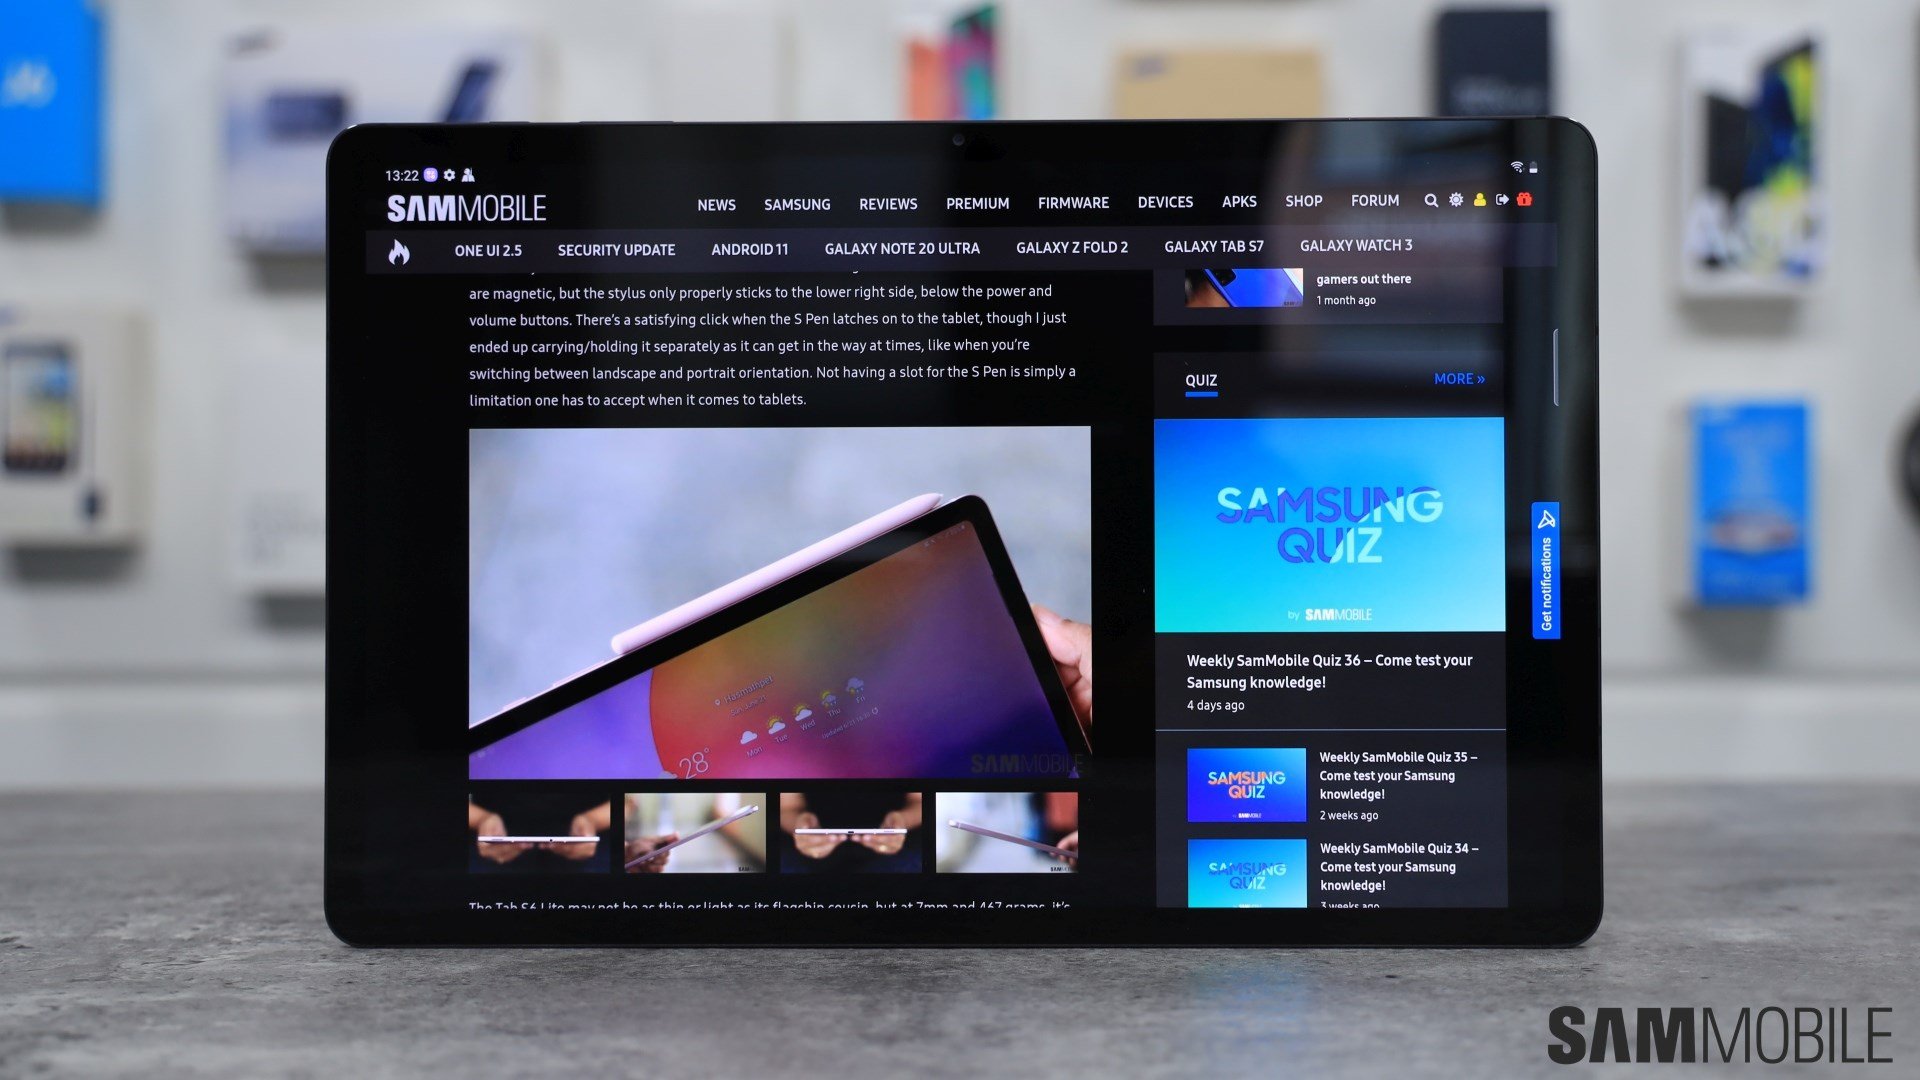 Samsung Galaxy Tab S7 Plus Review: Awesome Tablet For Video